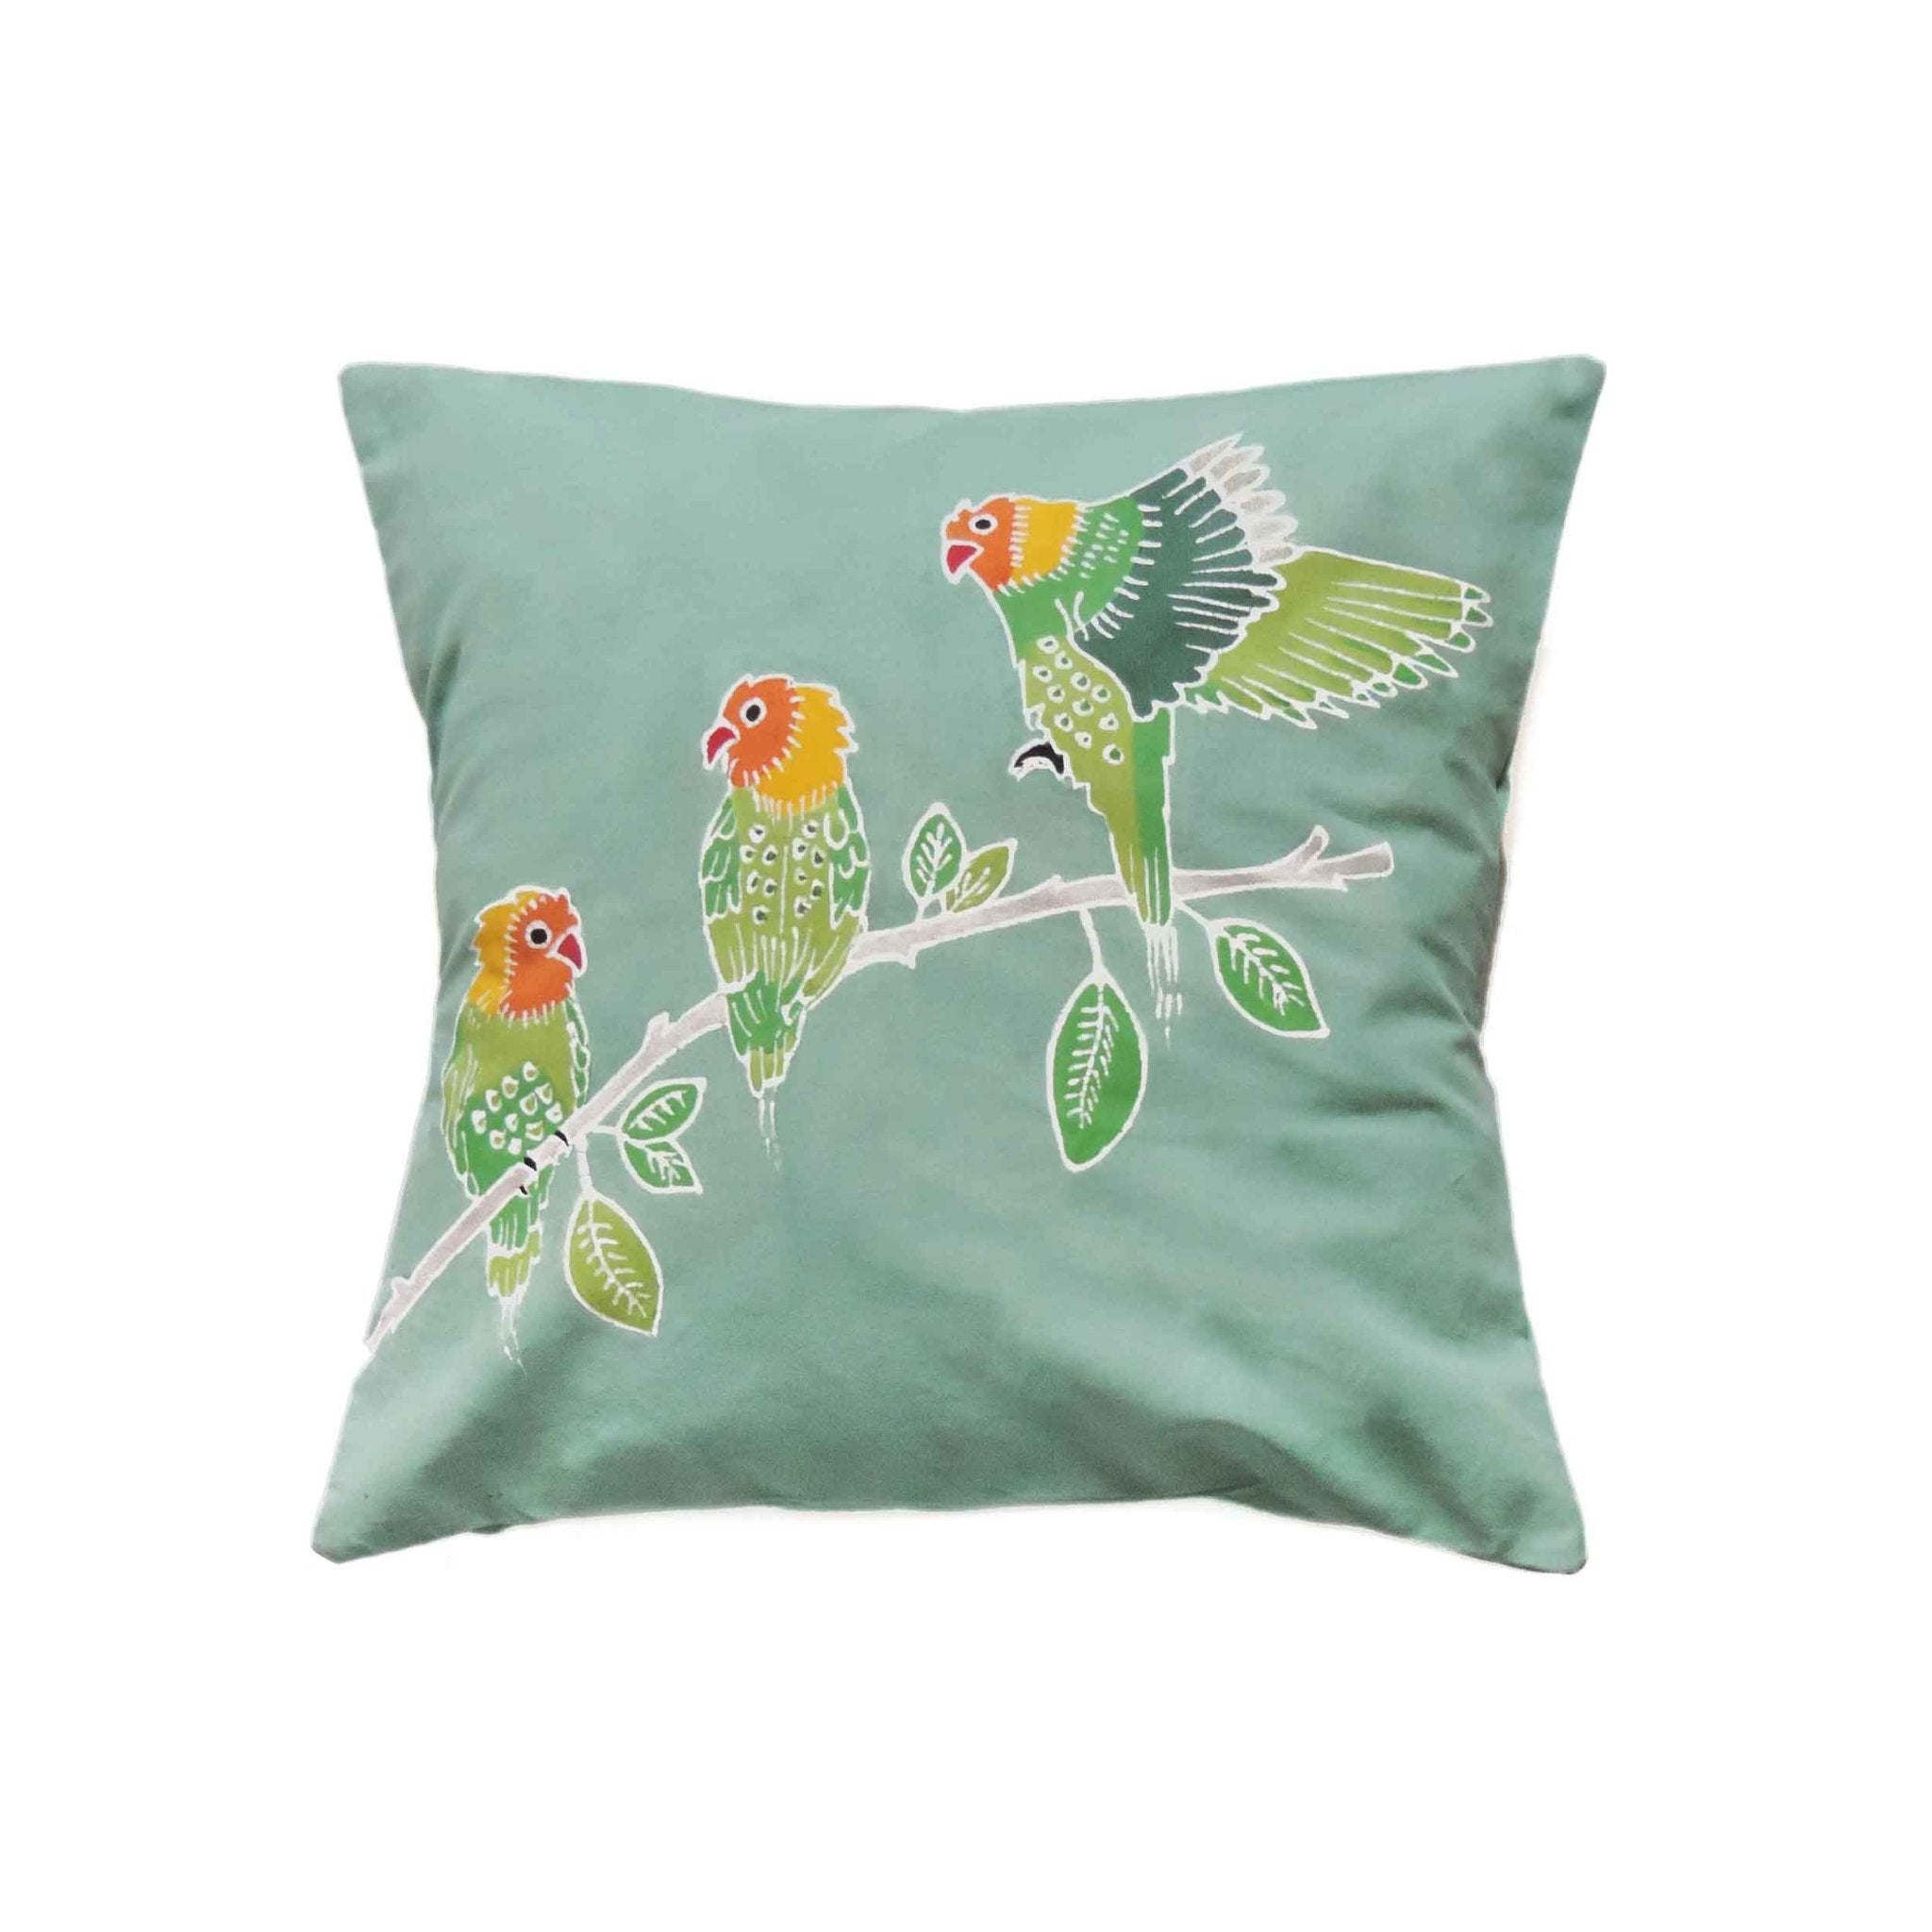 Perfect light green cushion cover adorned with colourful lovebirds, which bring a stylish and sustainable nature feature.